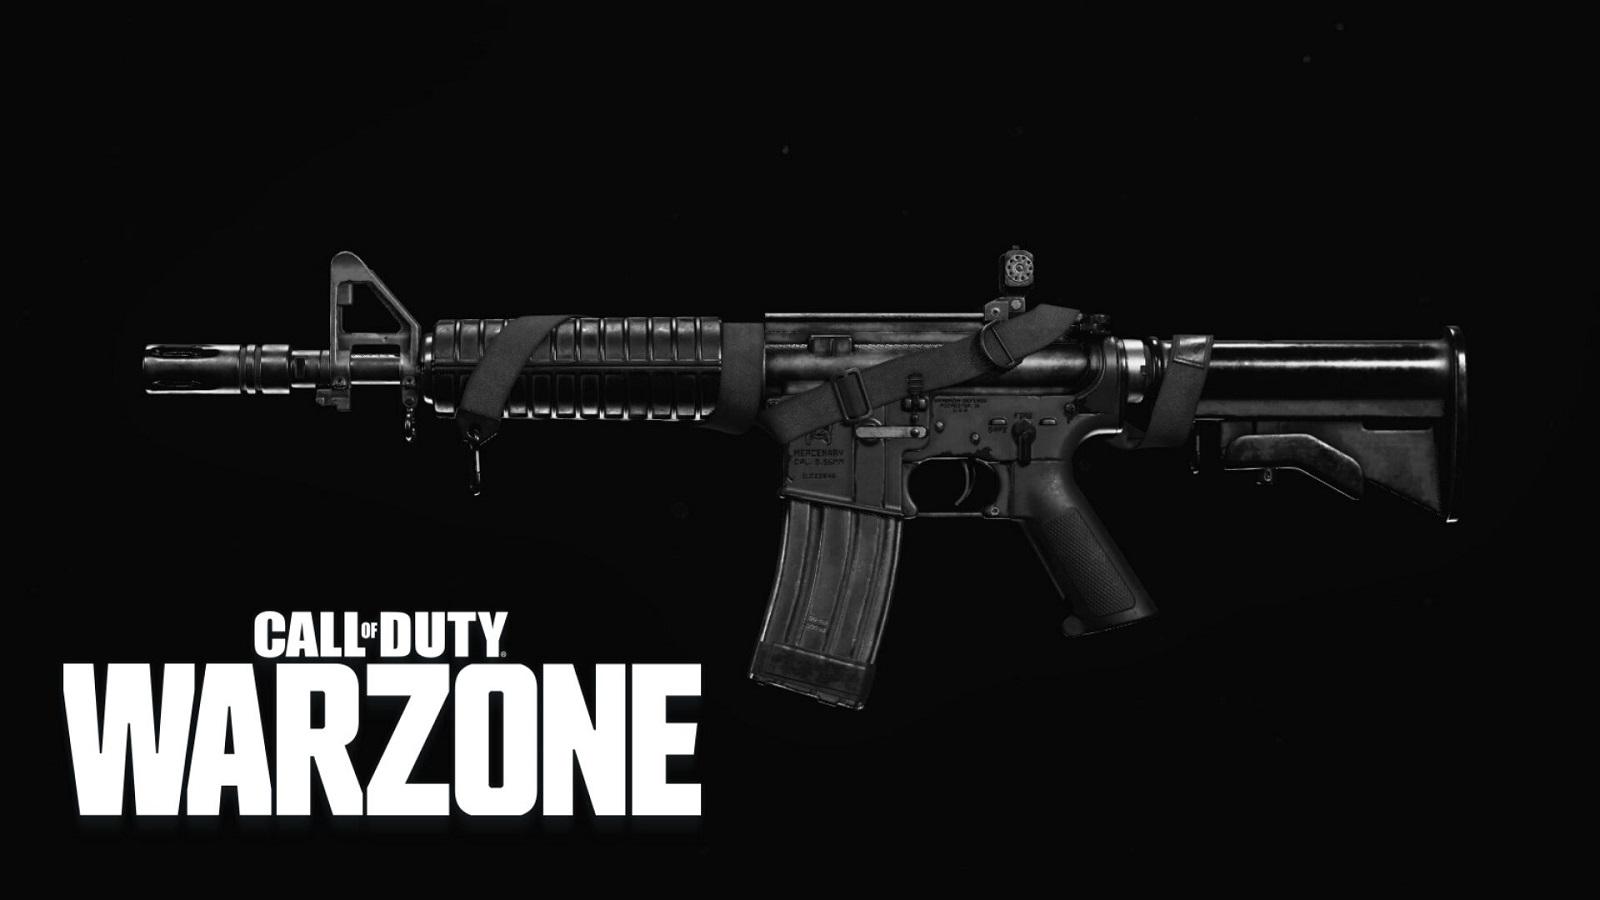 XM4 Assault Rifle in CoD Warzone